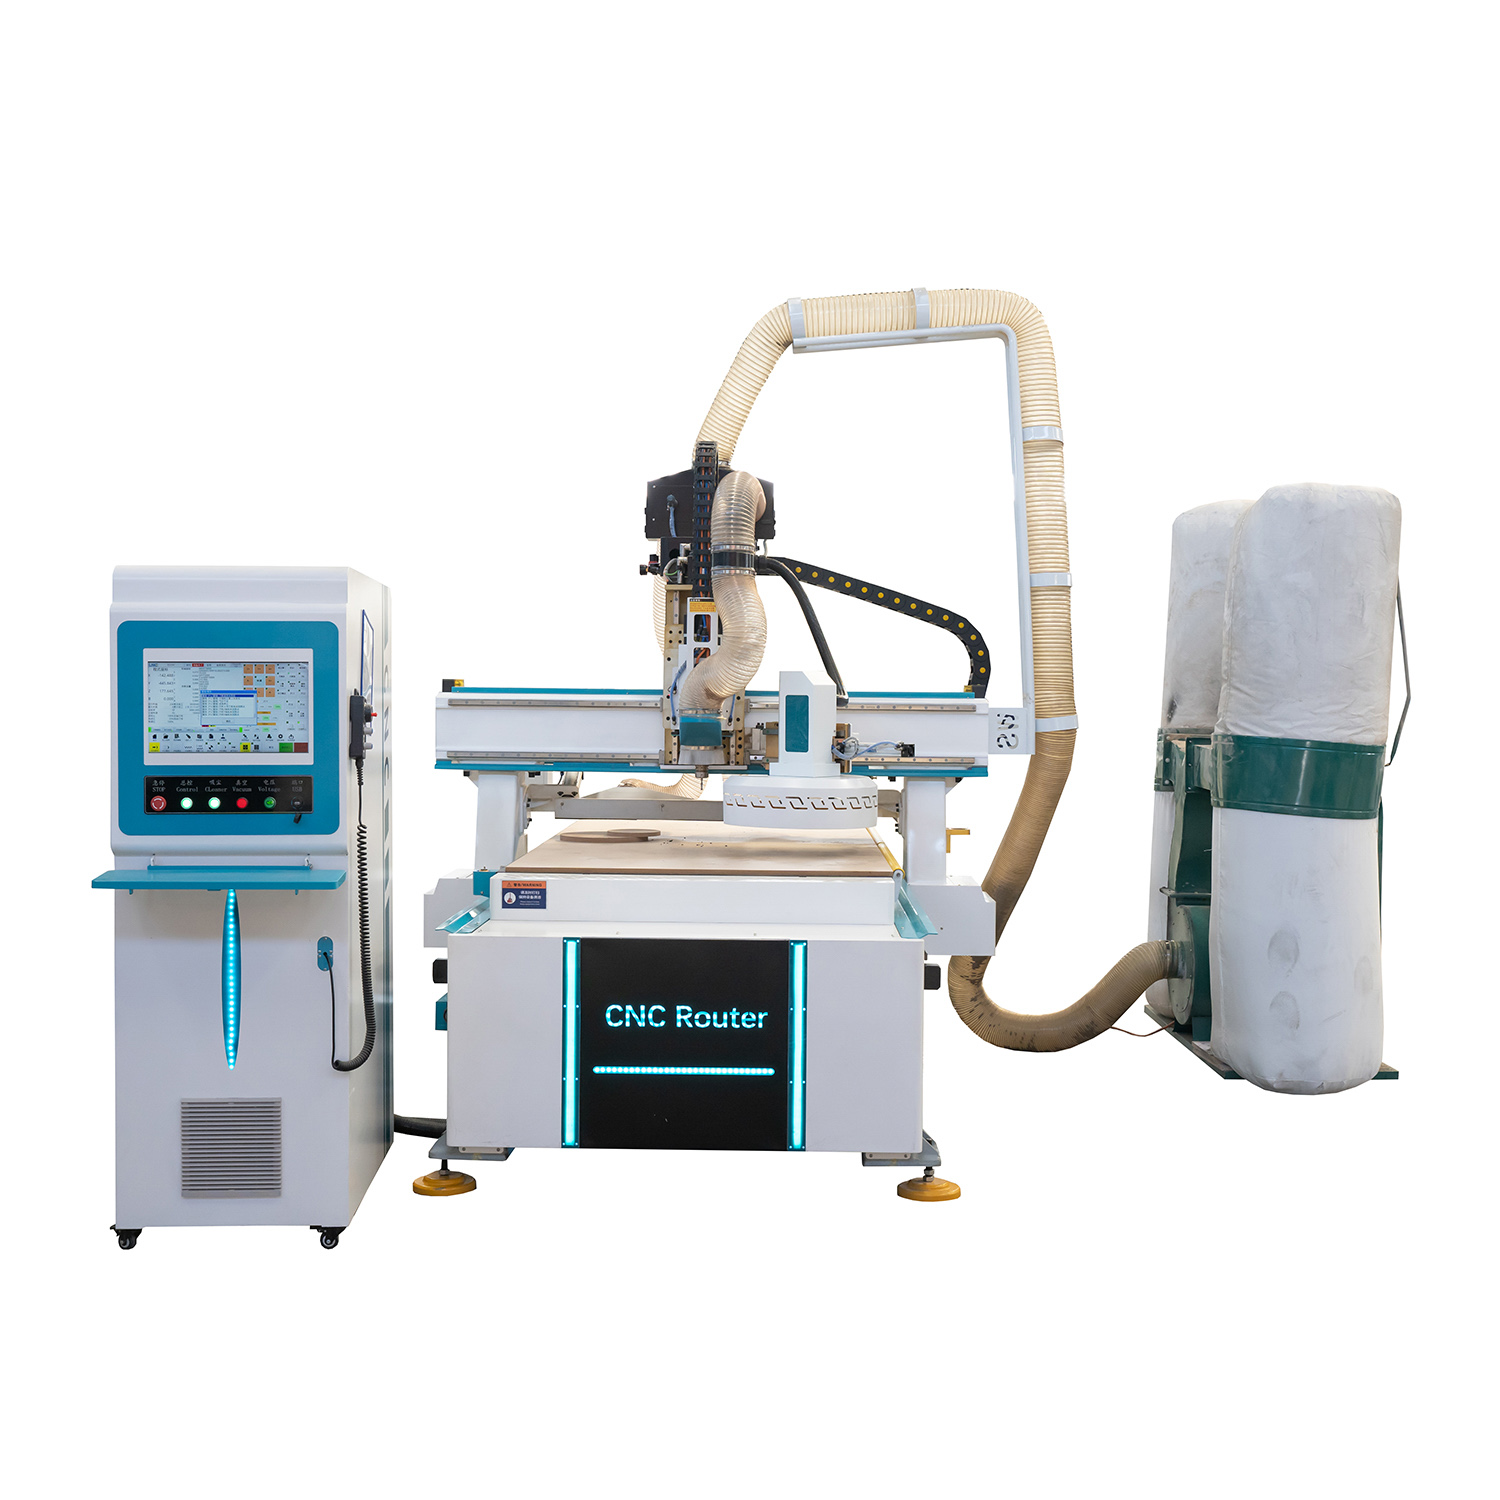 ATC CNC Router with Automatic Tool Changer Spindle 2021 new design Featured Image